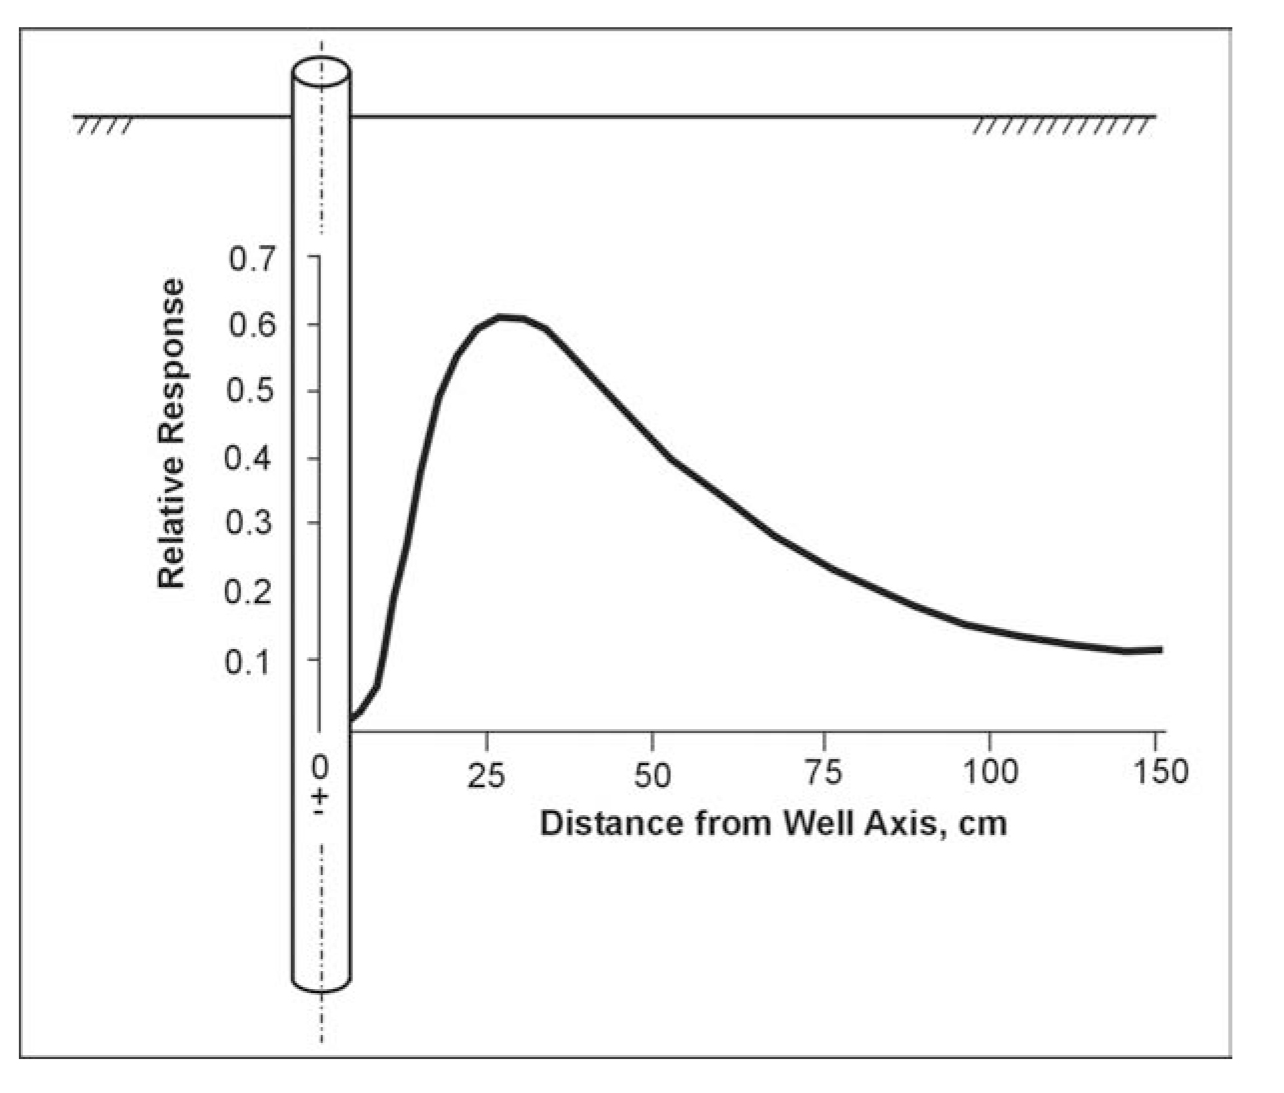 Relative response of an induction probe with radial distance from borehole axis (copyright permission granted by Geonics Ltd.)